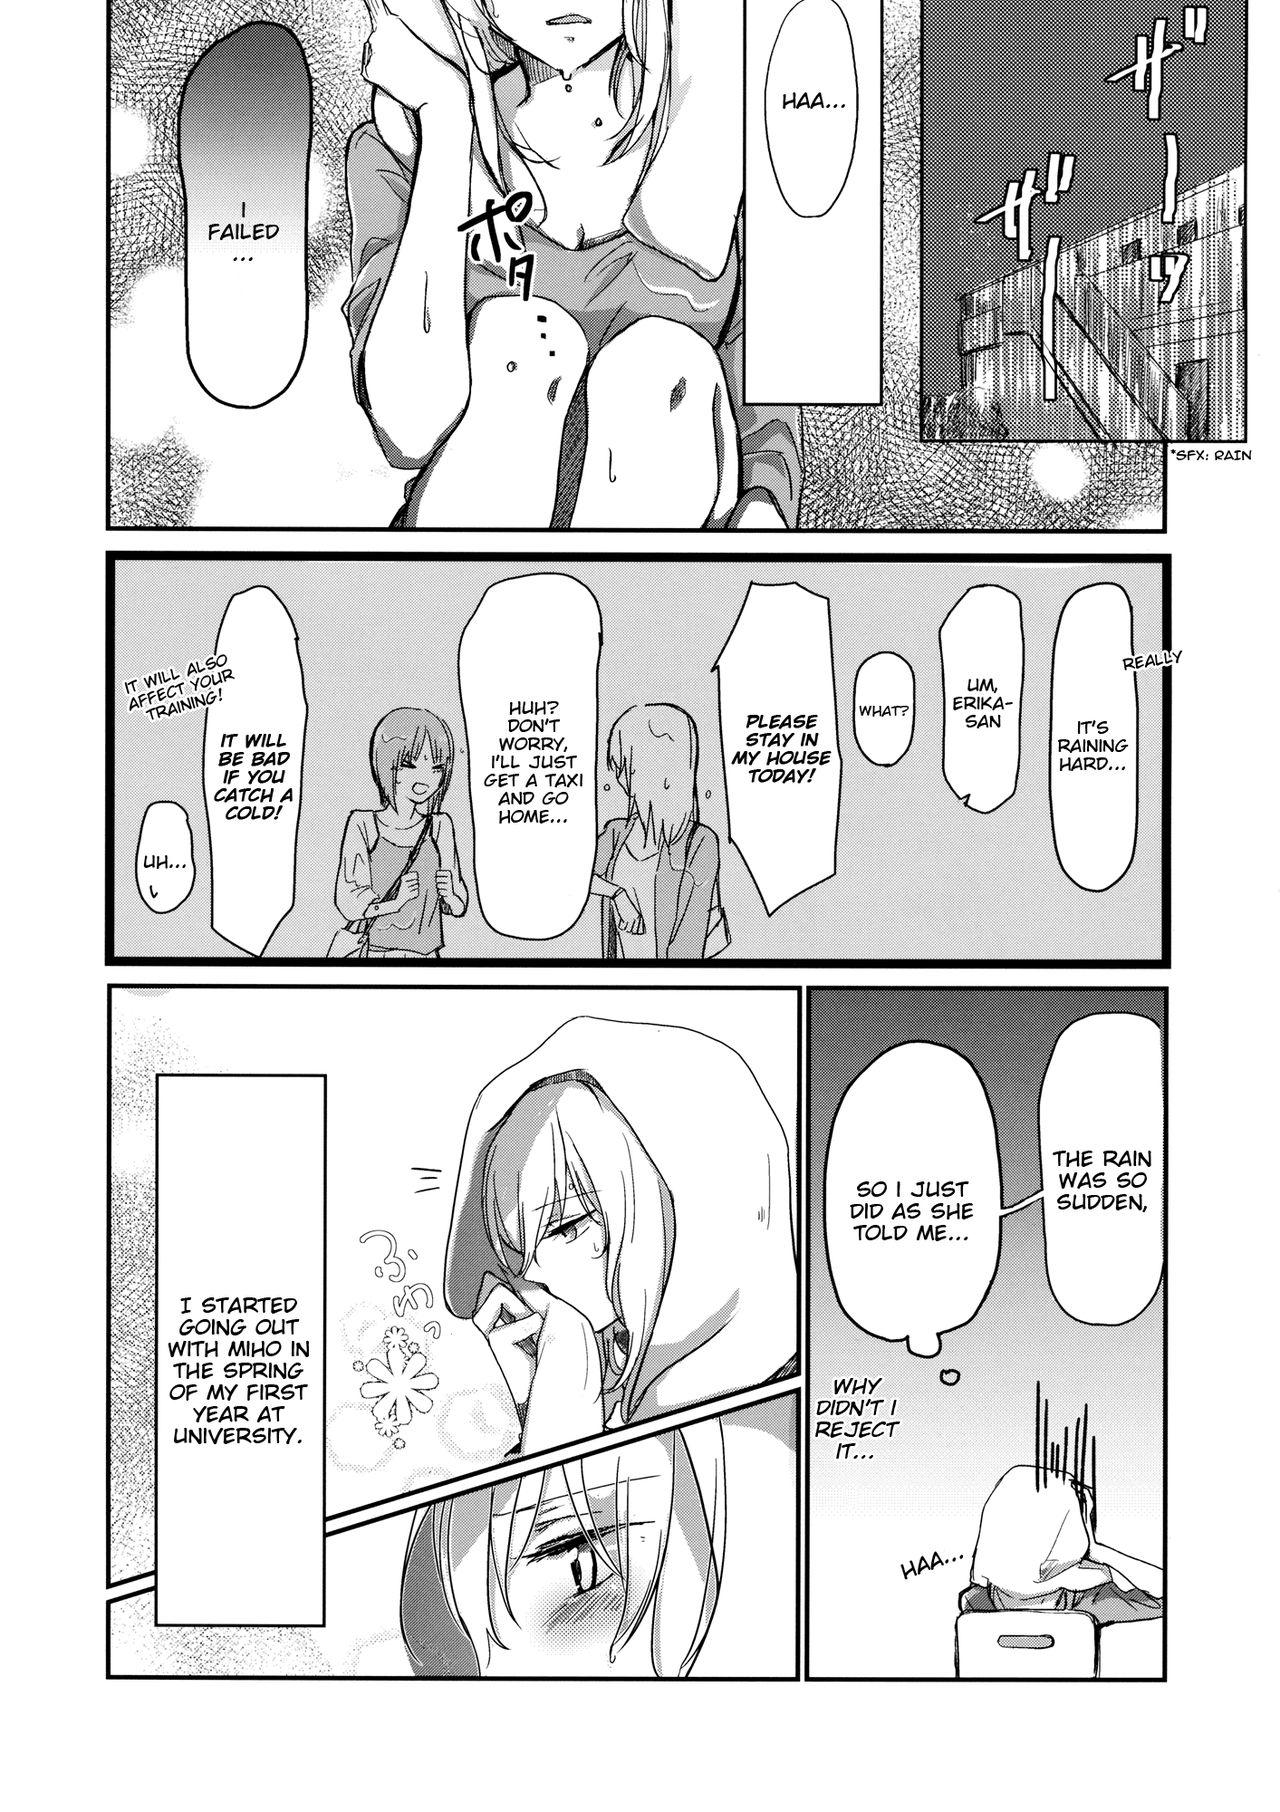 Bathroom for the first time - Girls und panzer Whatsapp - Page 3